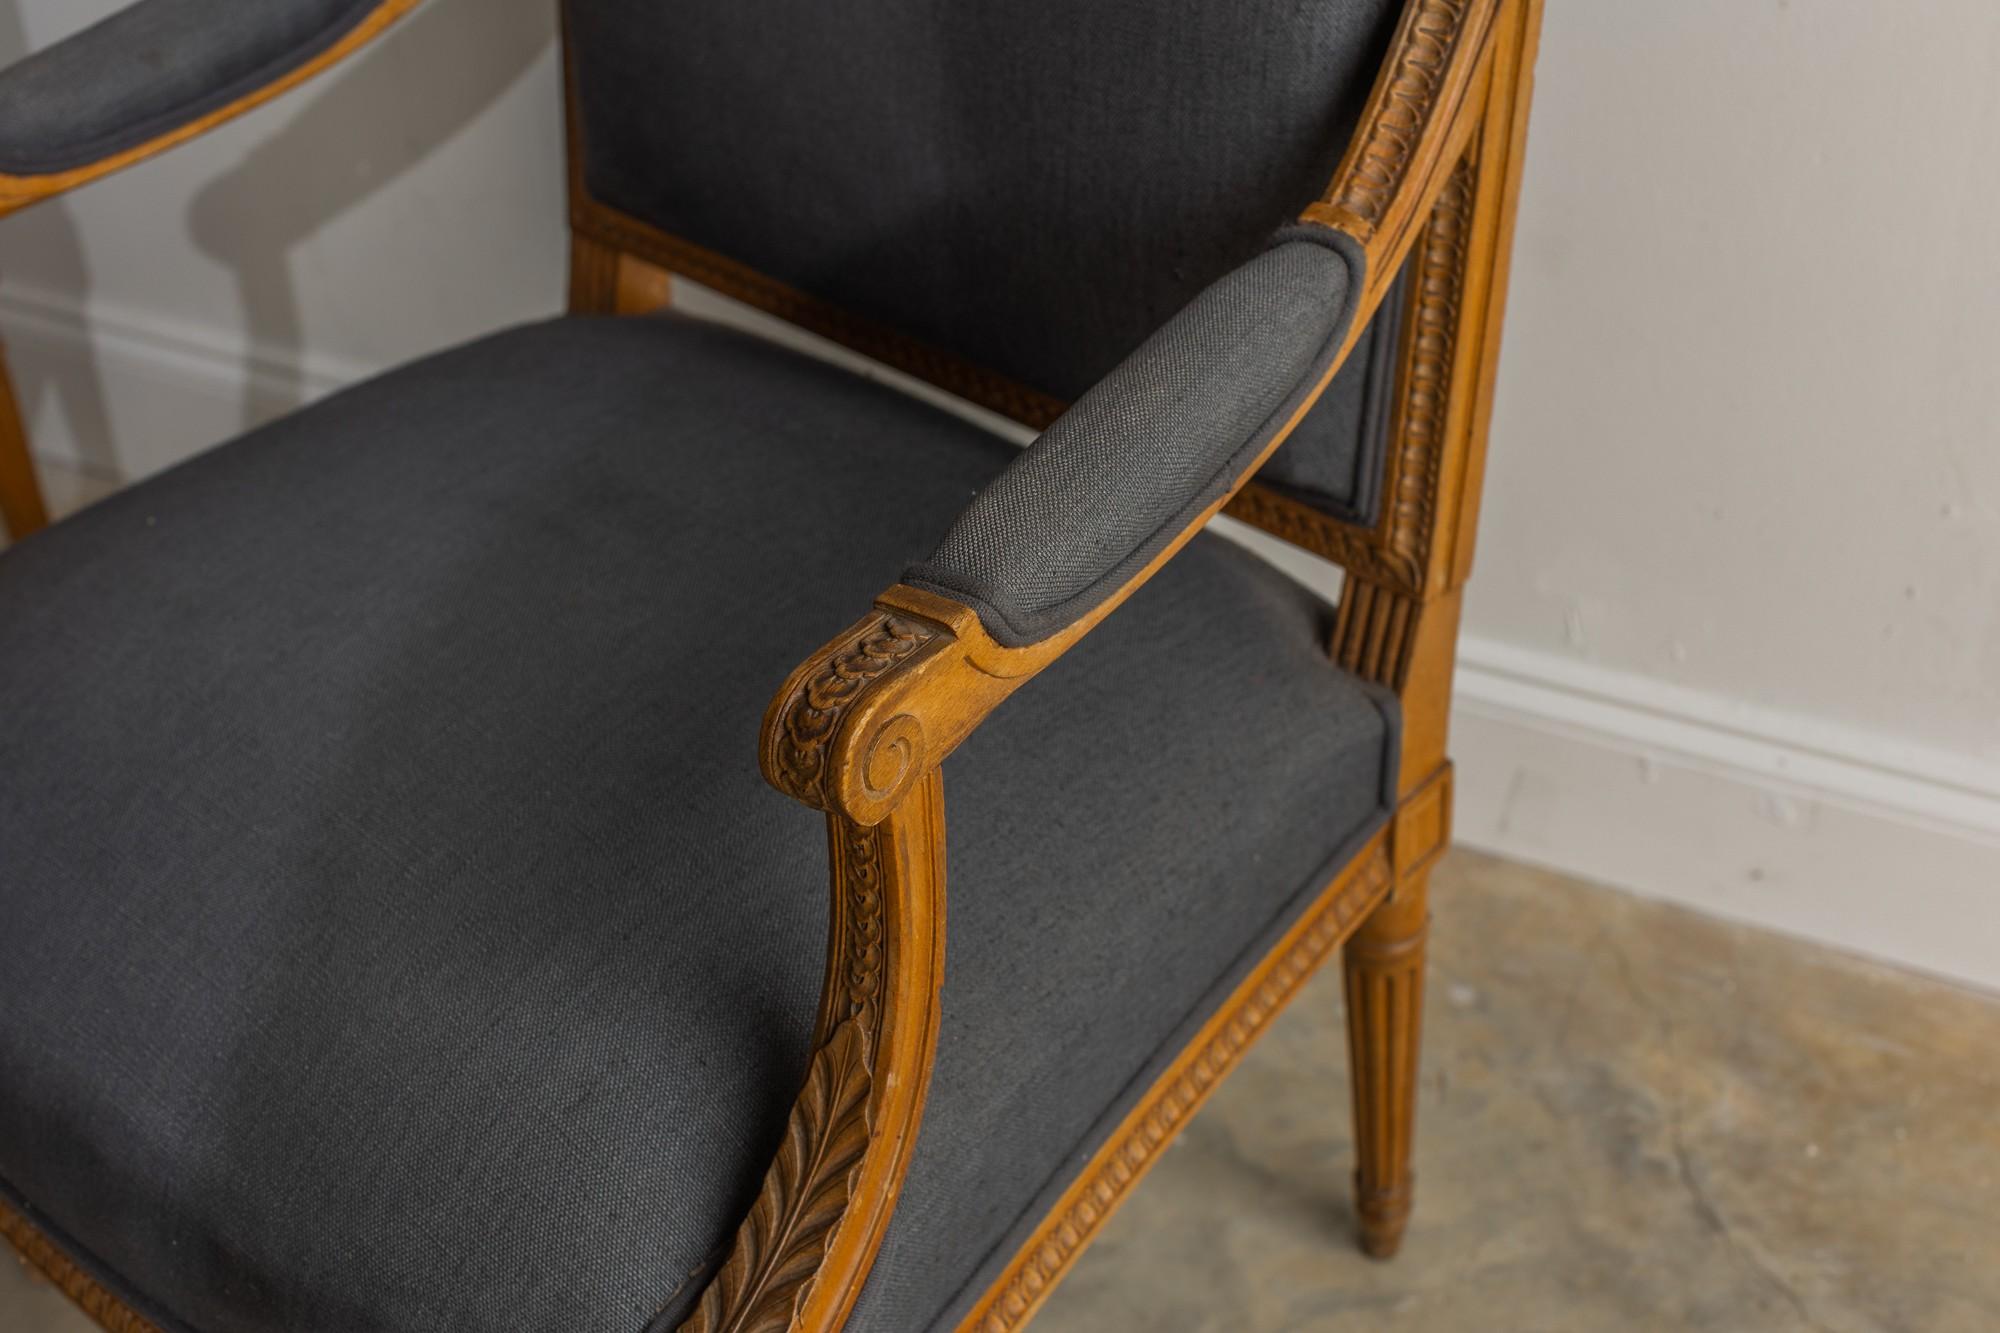 This beautiful pair of cabriolet armchairs is in pristine condition with no flaws. They are also very sturdy. There is no wear on the fabric or the wood. The colors of the fabric and wood are very beautiful.